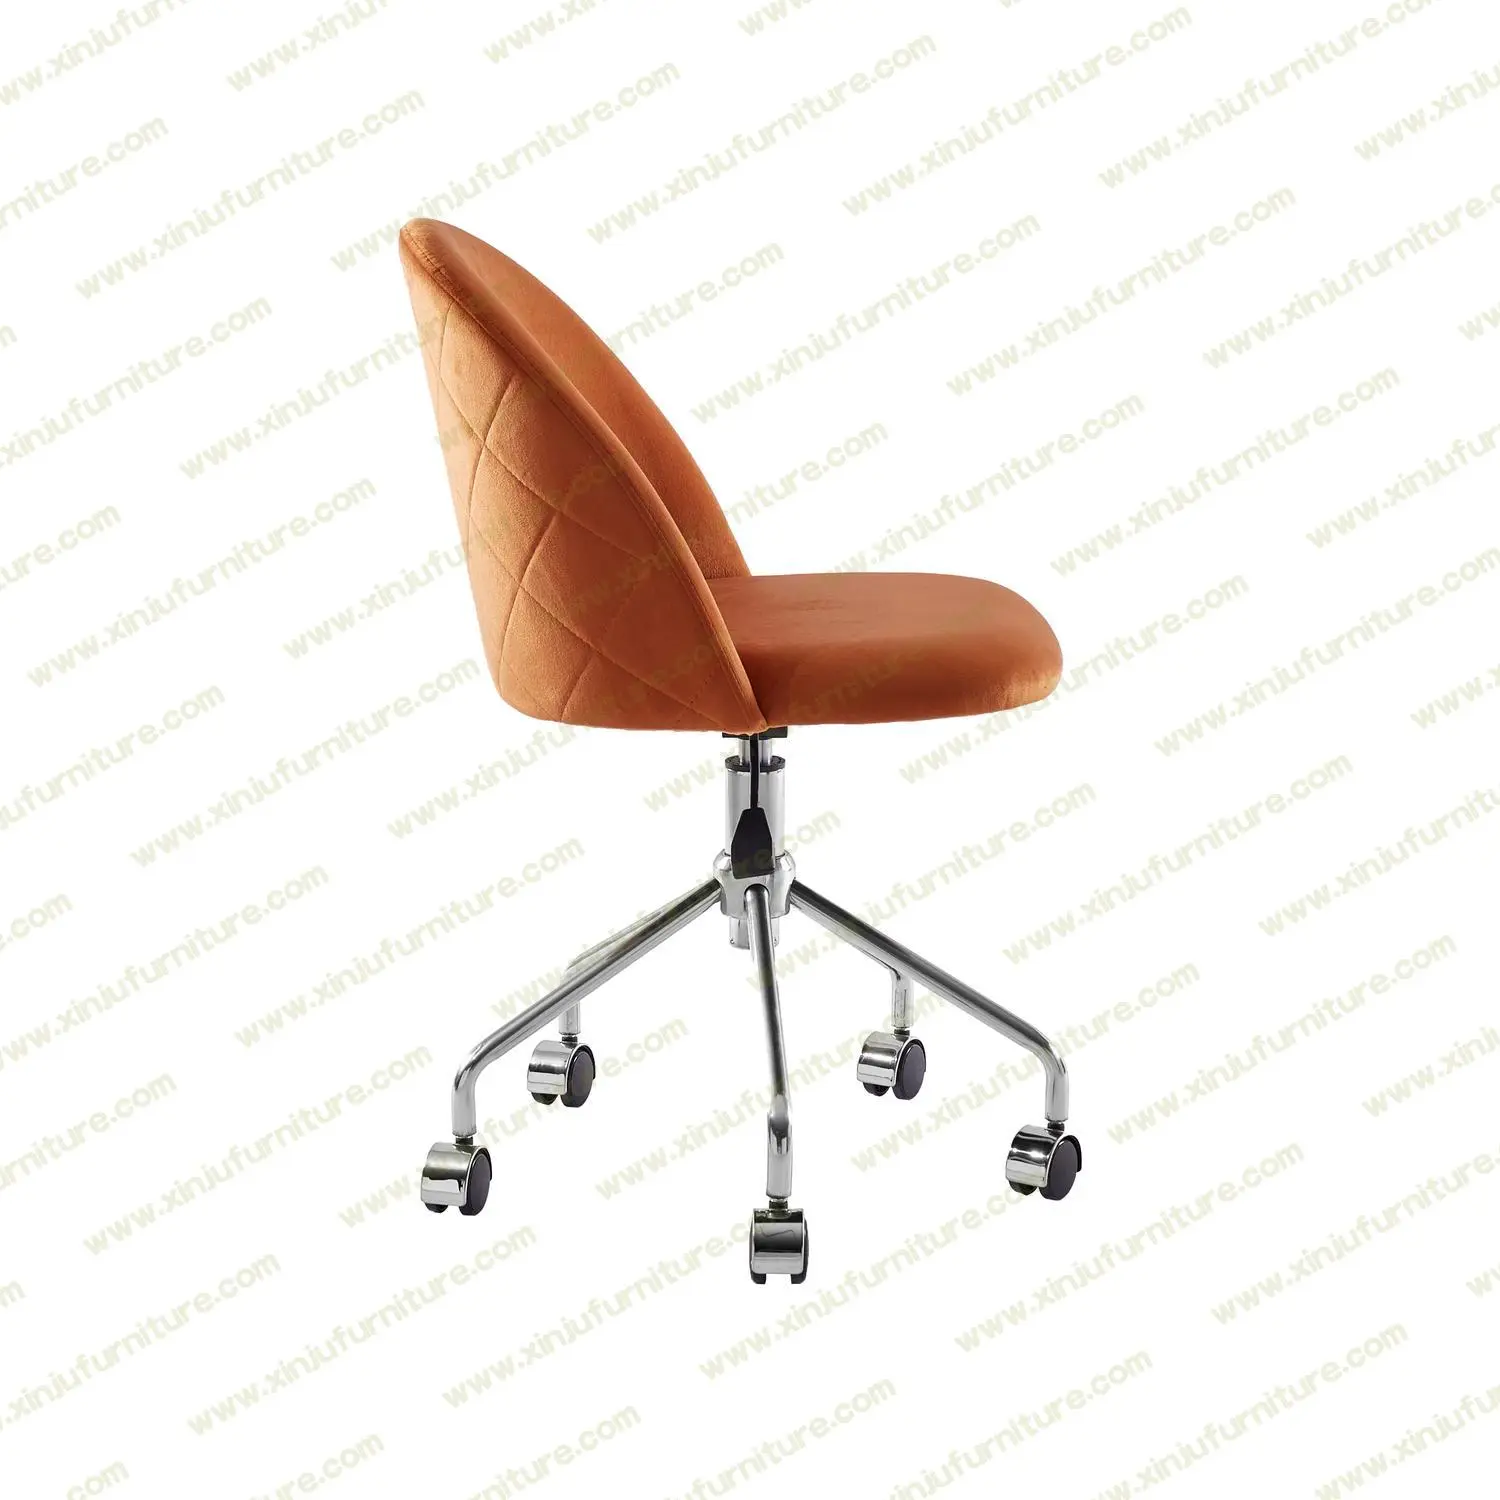 Simple movable tufted office chair light red